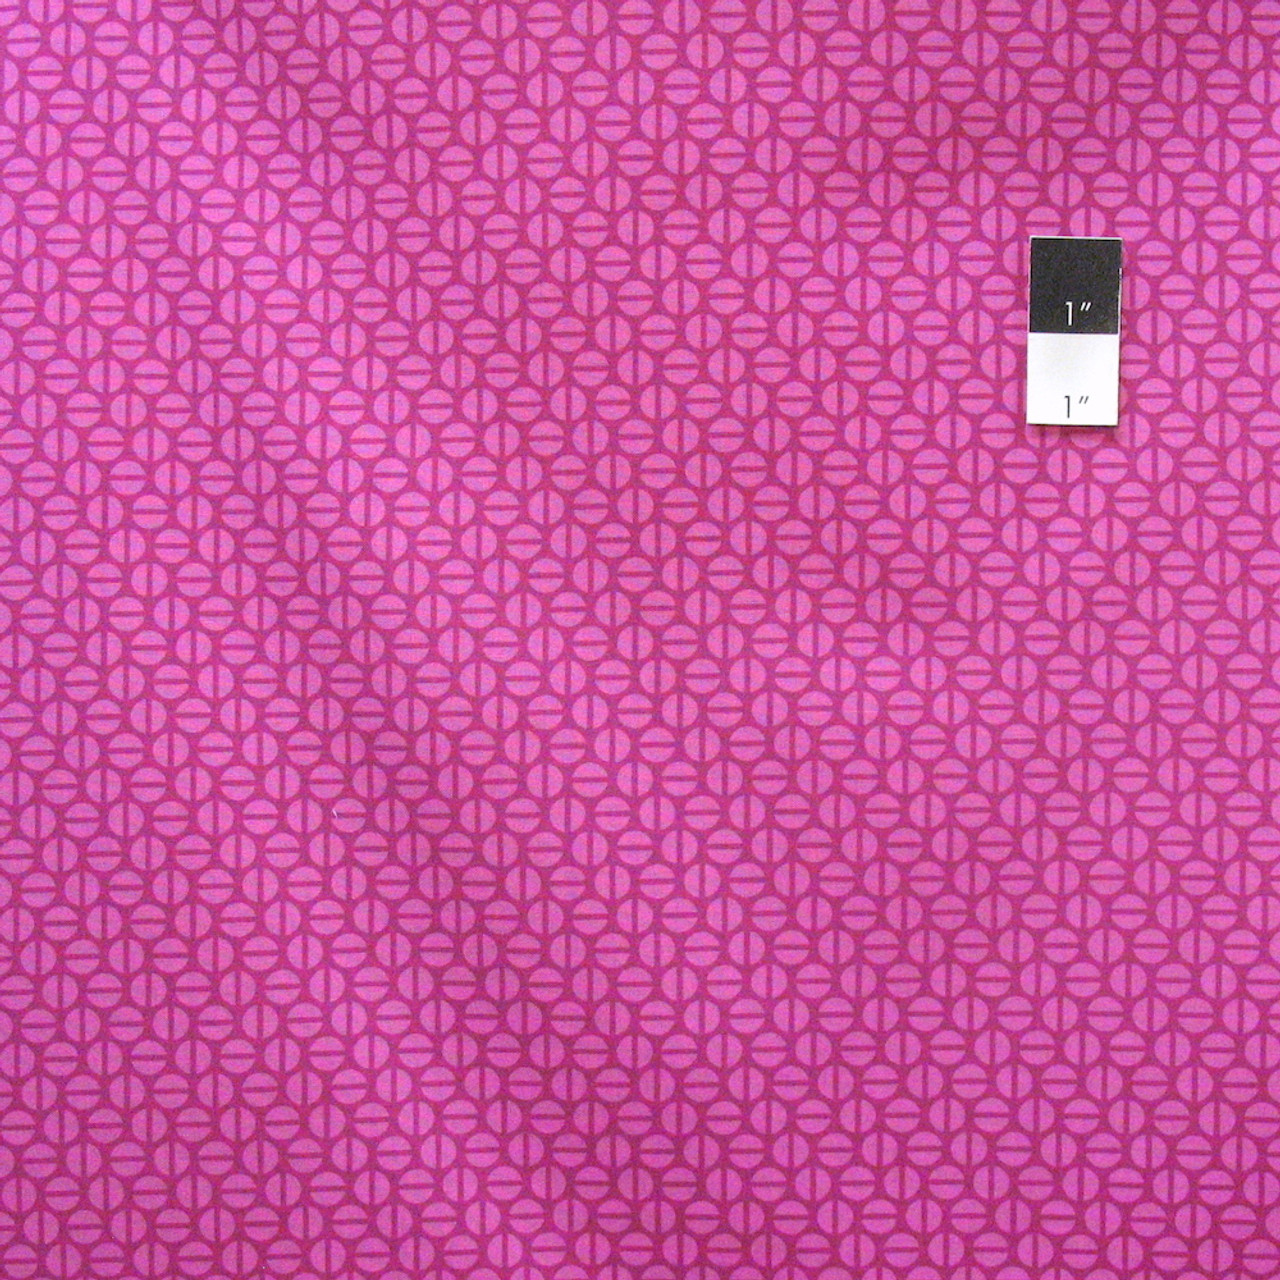 Heather Bailey True Colors PWTC036 Divvy Dot Violet Cotton Fabric By The Yard